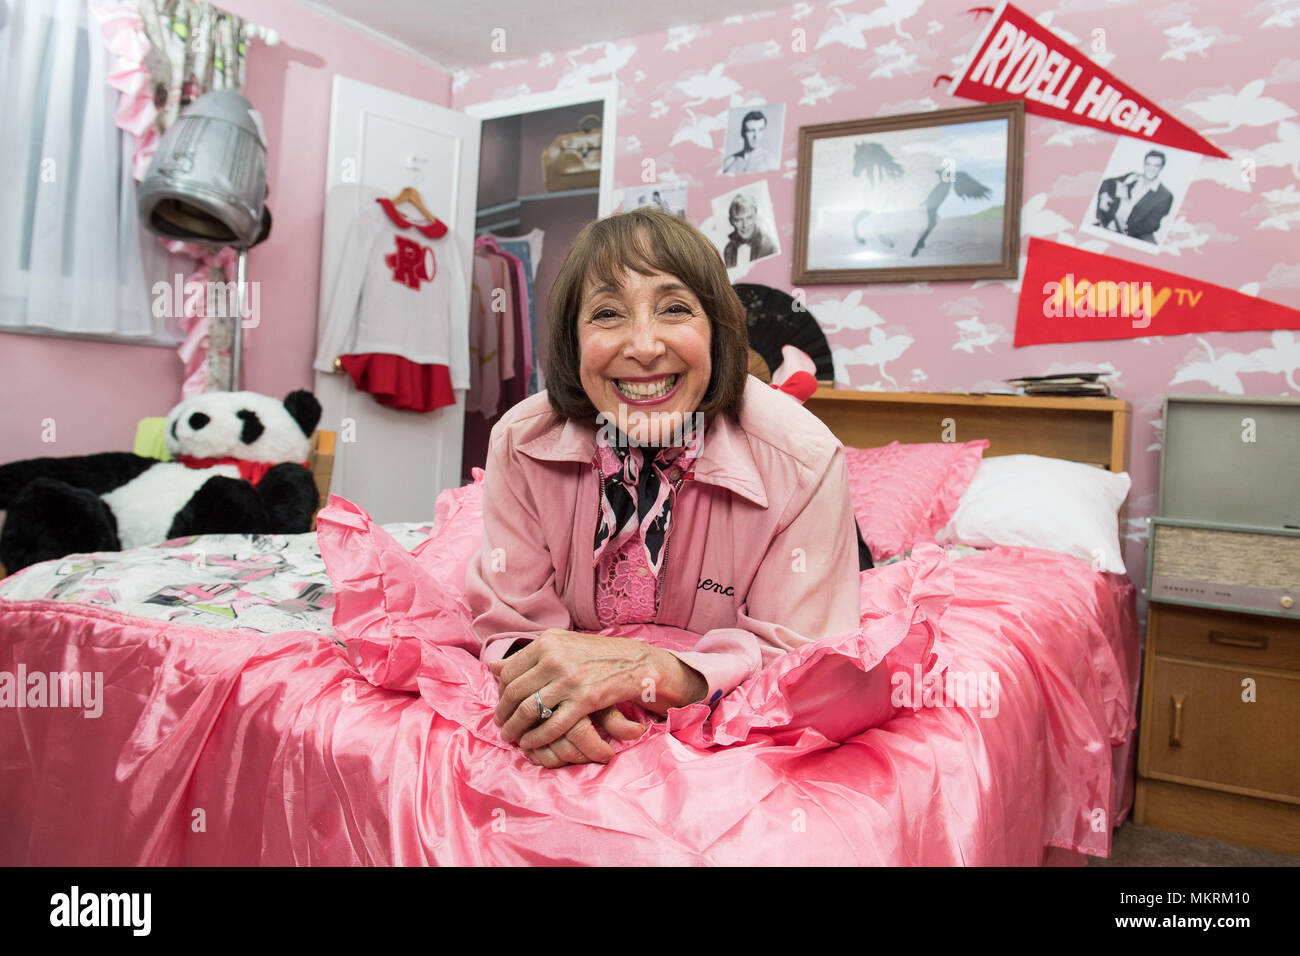 Actress Didi Conn, who played Frenchy in Grease, celebrates the 40th anniversary of the classic movie with streaming service NOW TV in a recreation of Frenchy's bedroom from the sleepover scene in the film, at a pop-up in Soho, London. Stock Photo